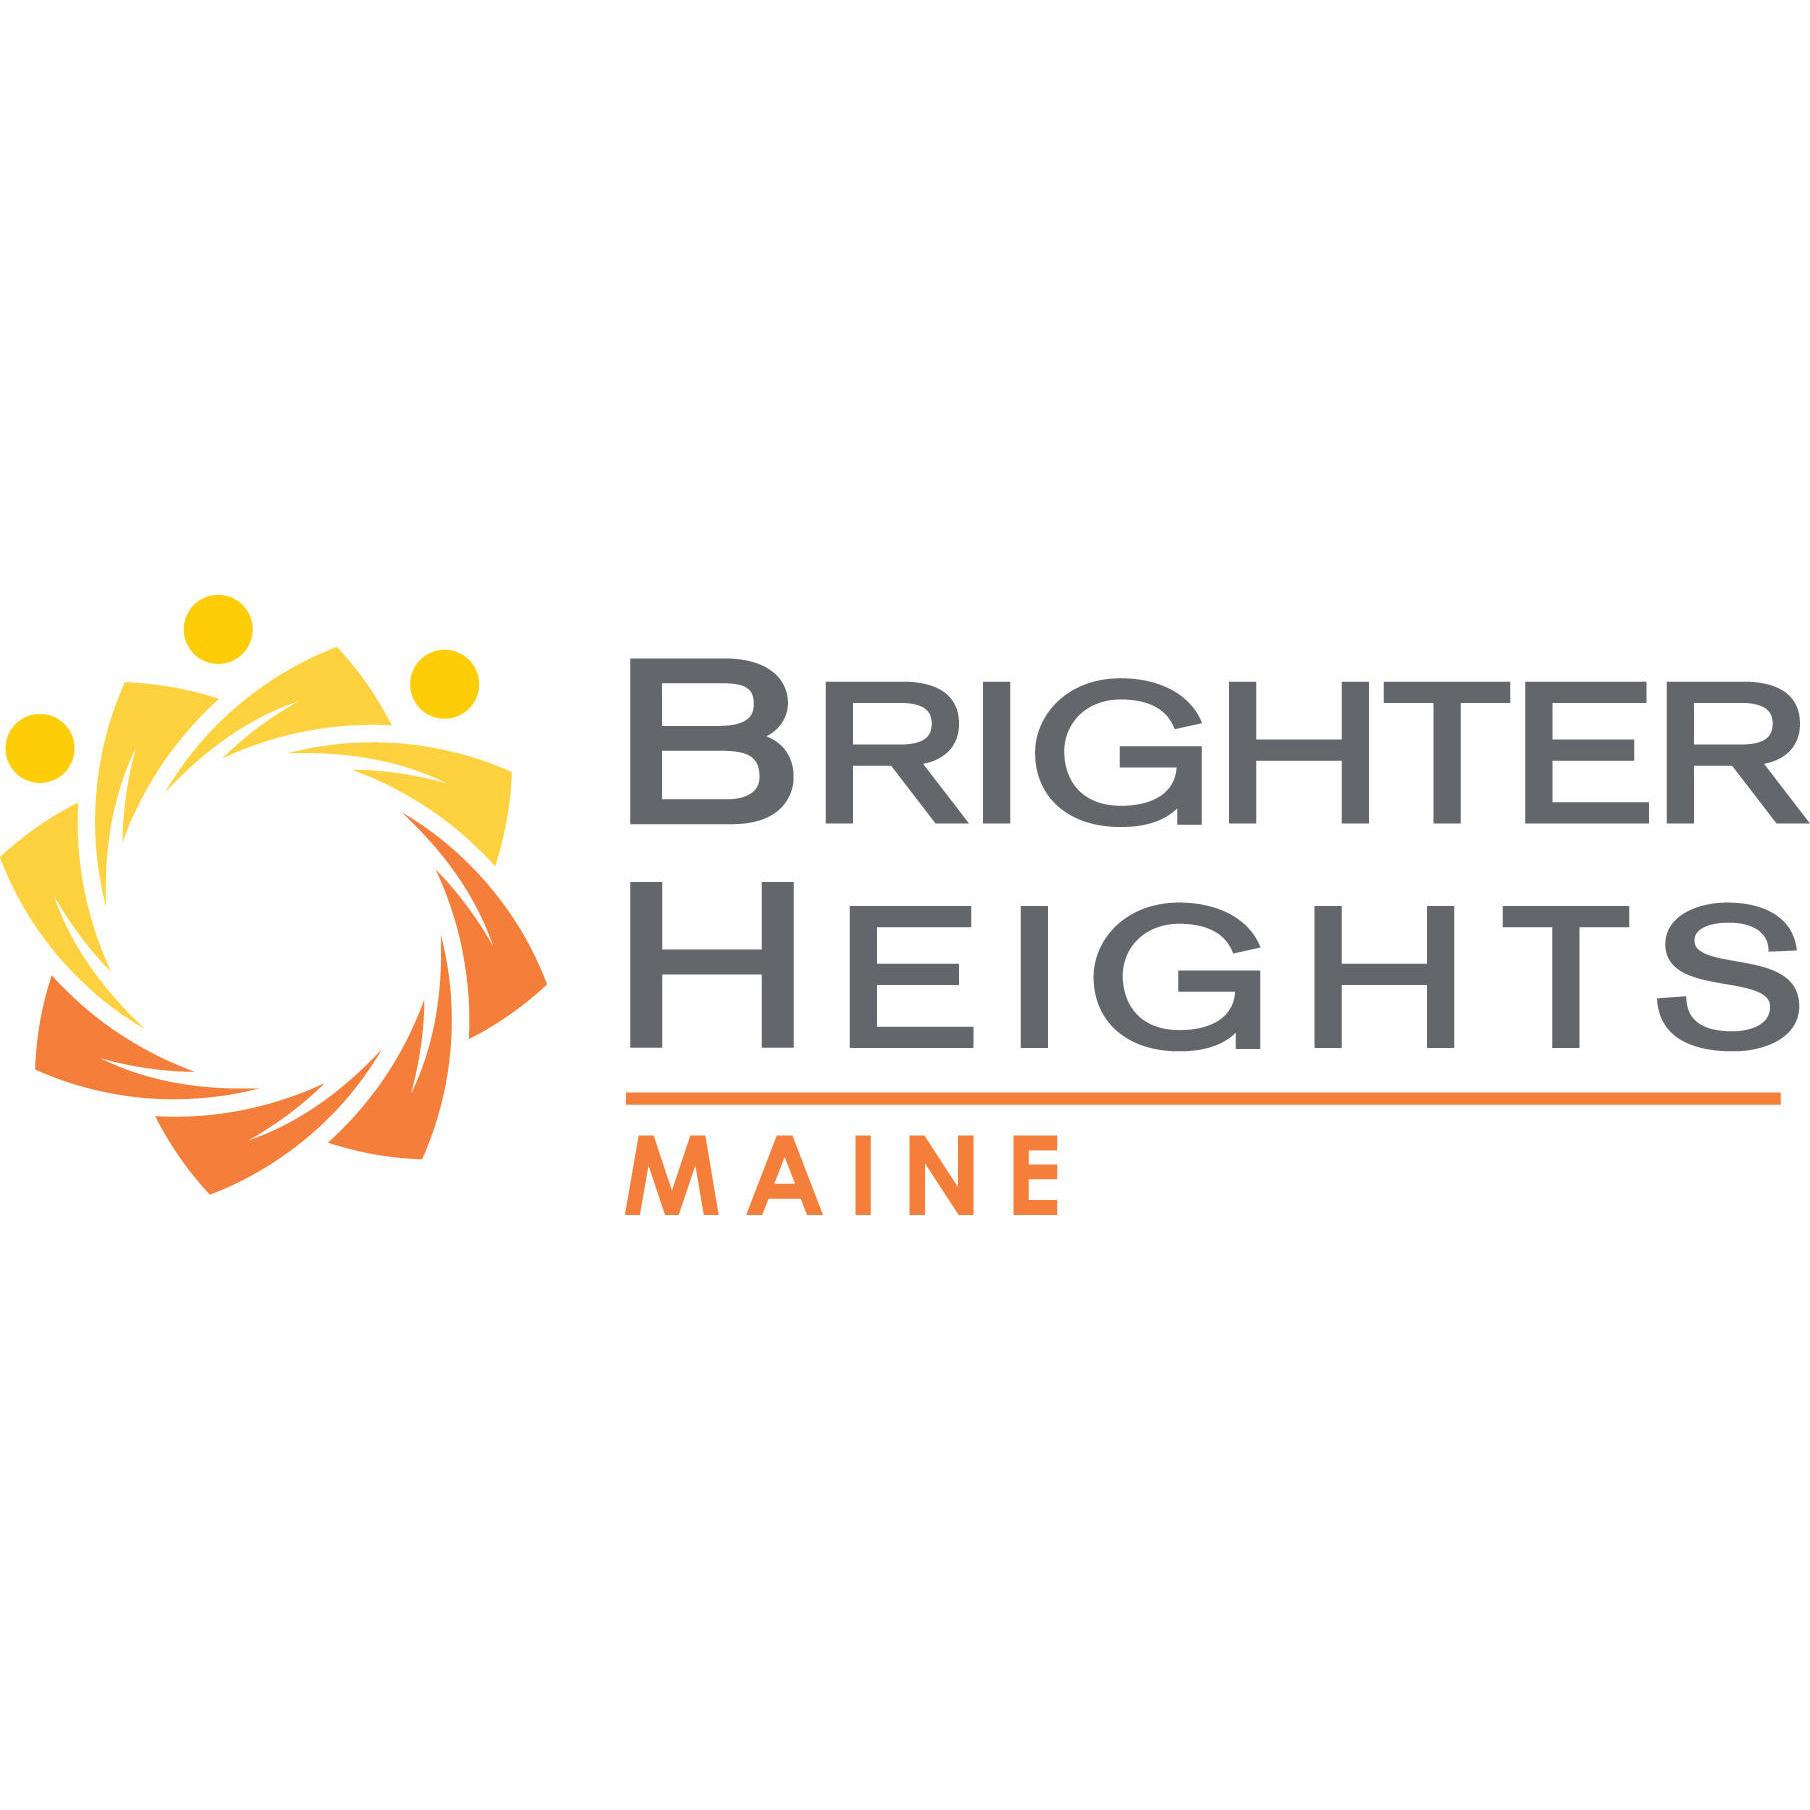 Brighter Heights Maine